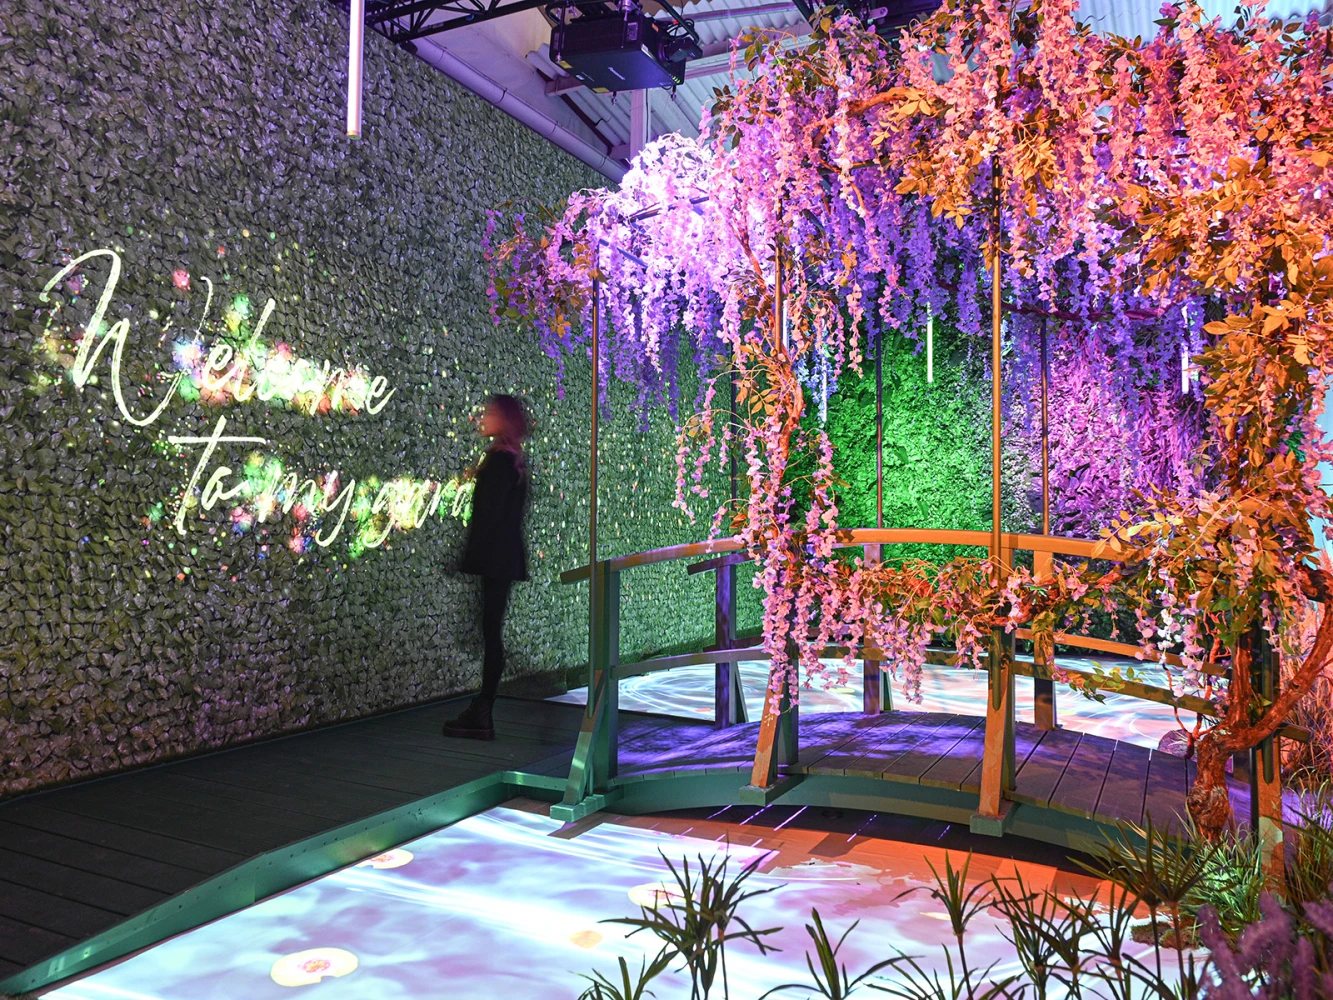 Monet's Garden: The Immersive Experience: What to expect - 6